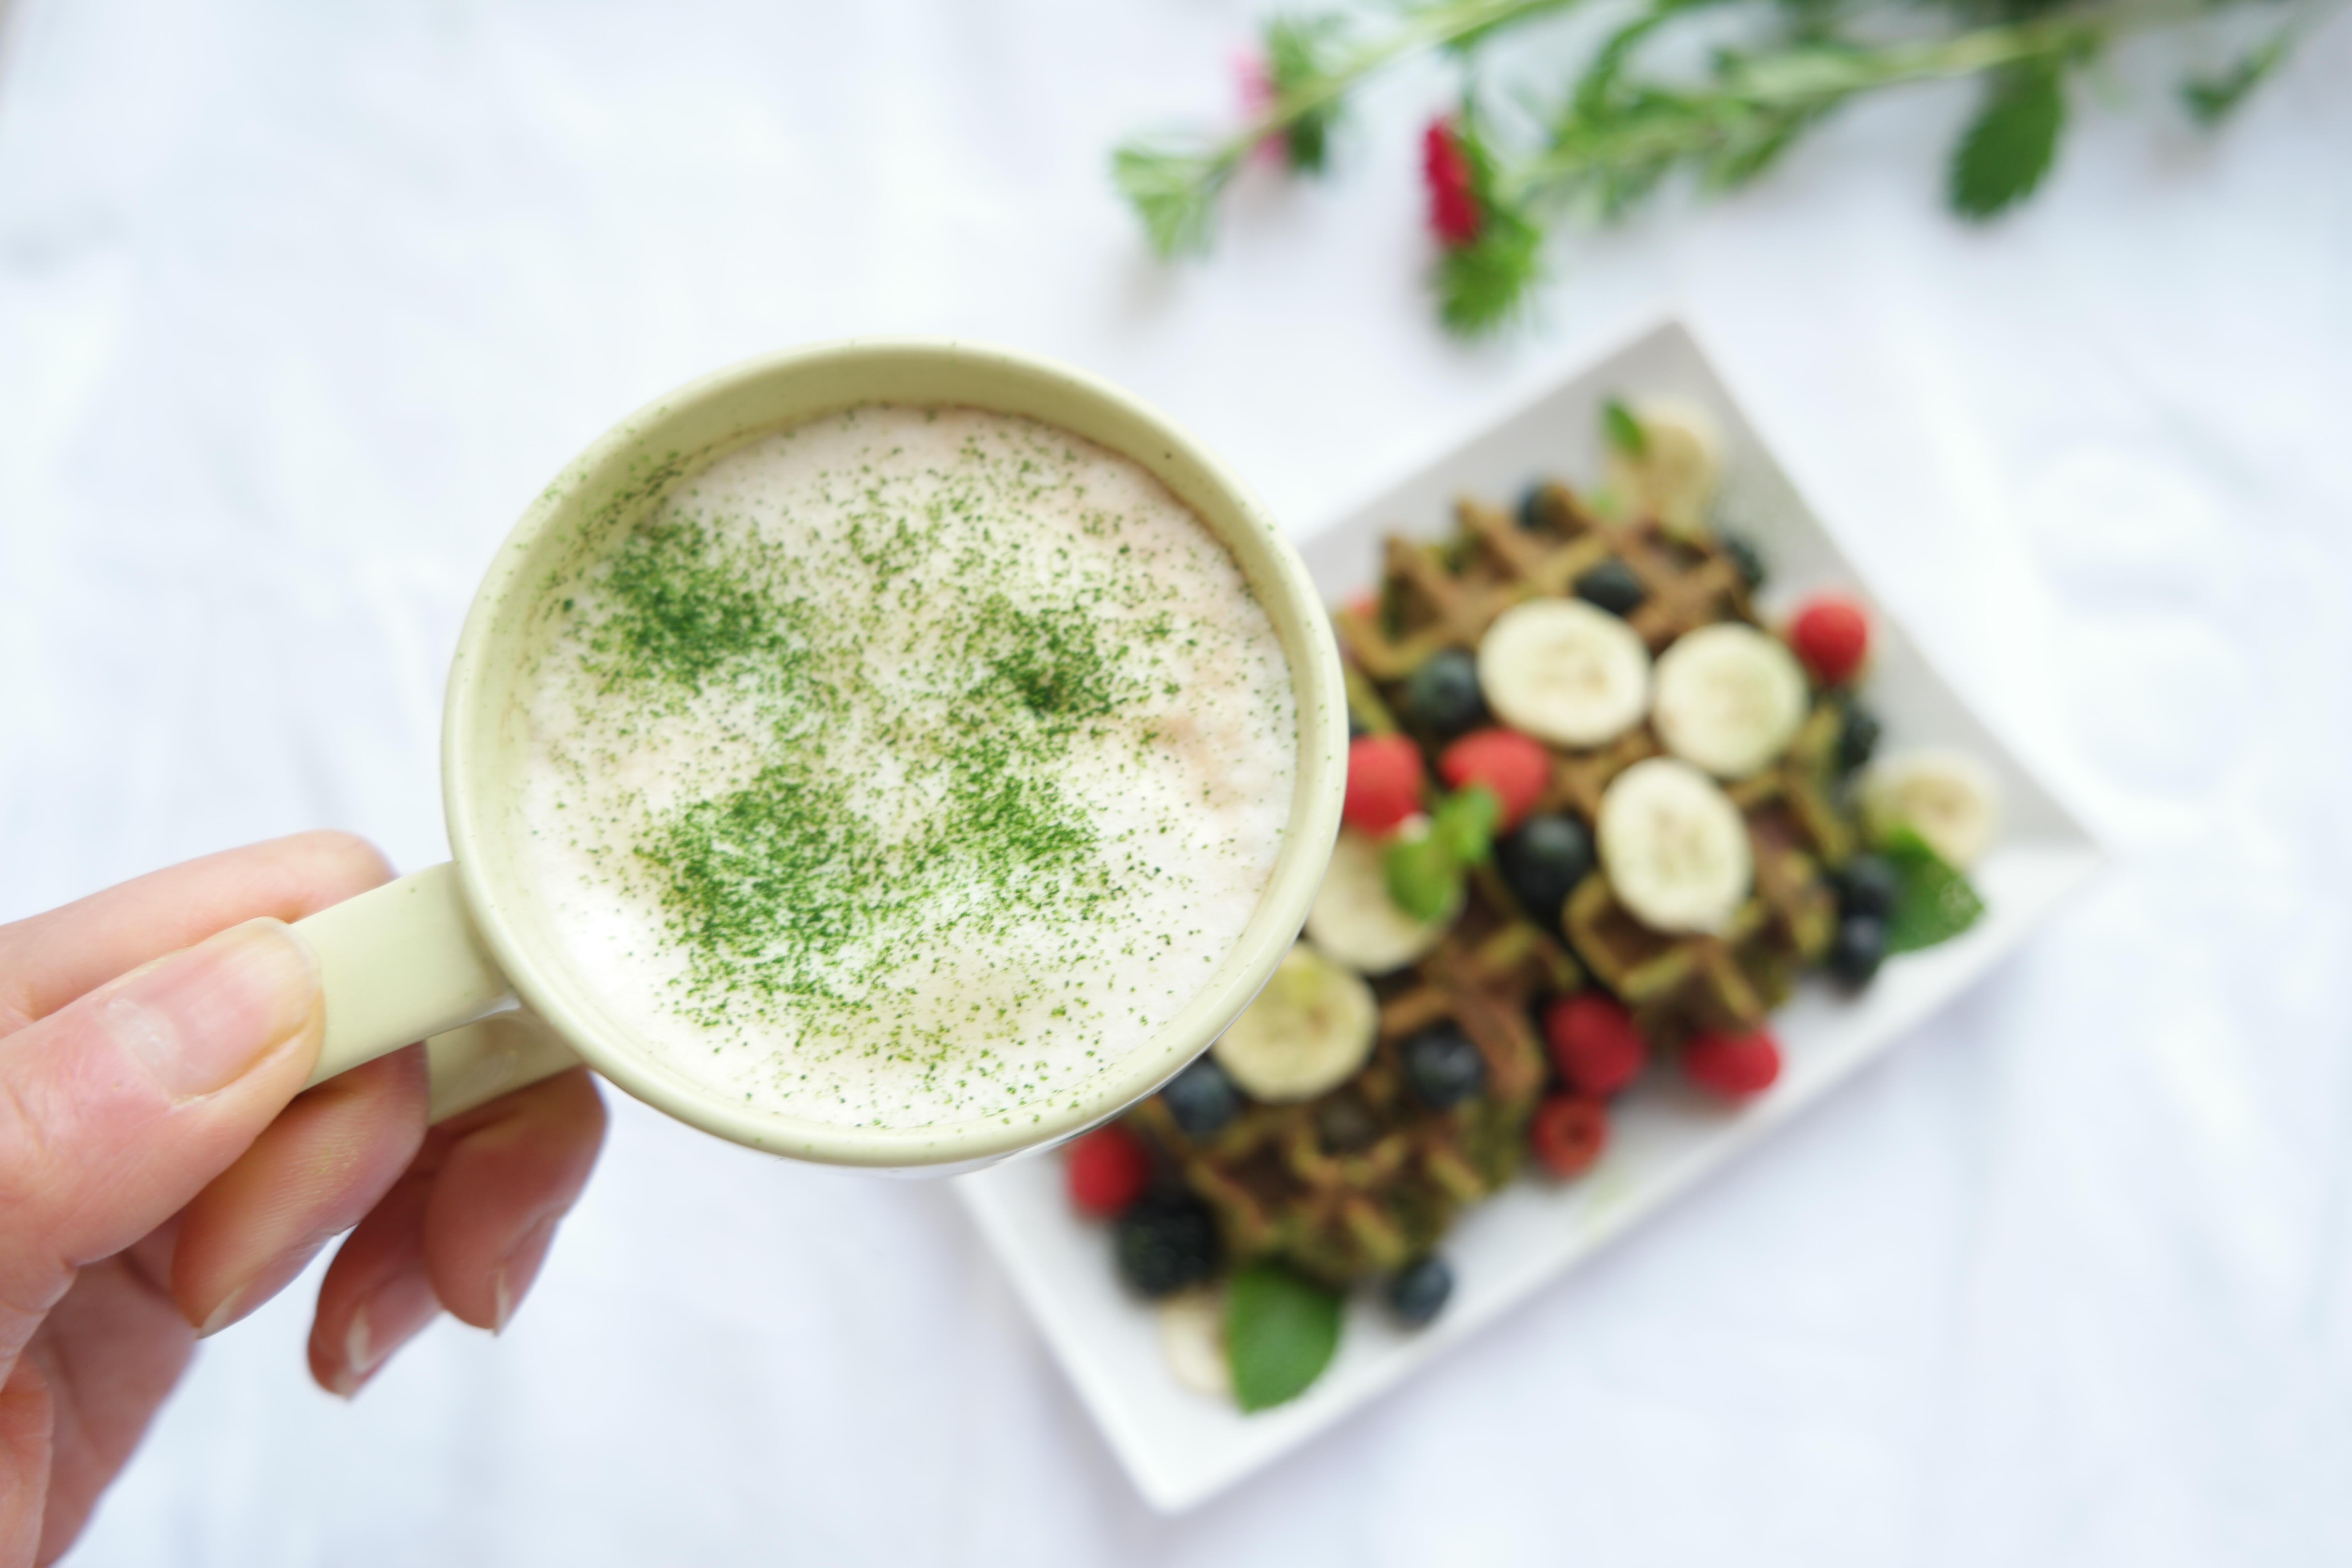 All about Matcha – the magical green tea powder